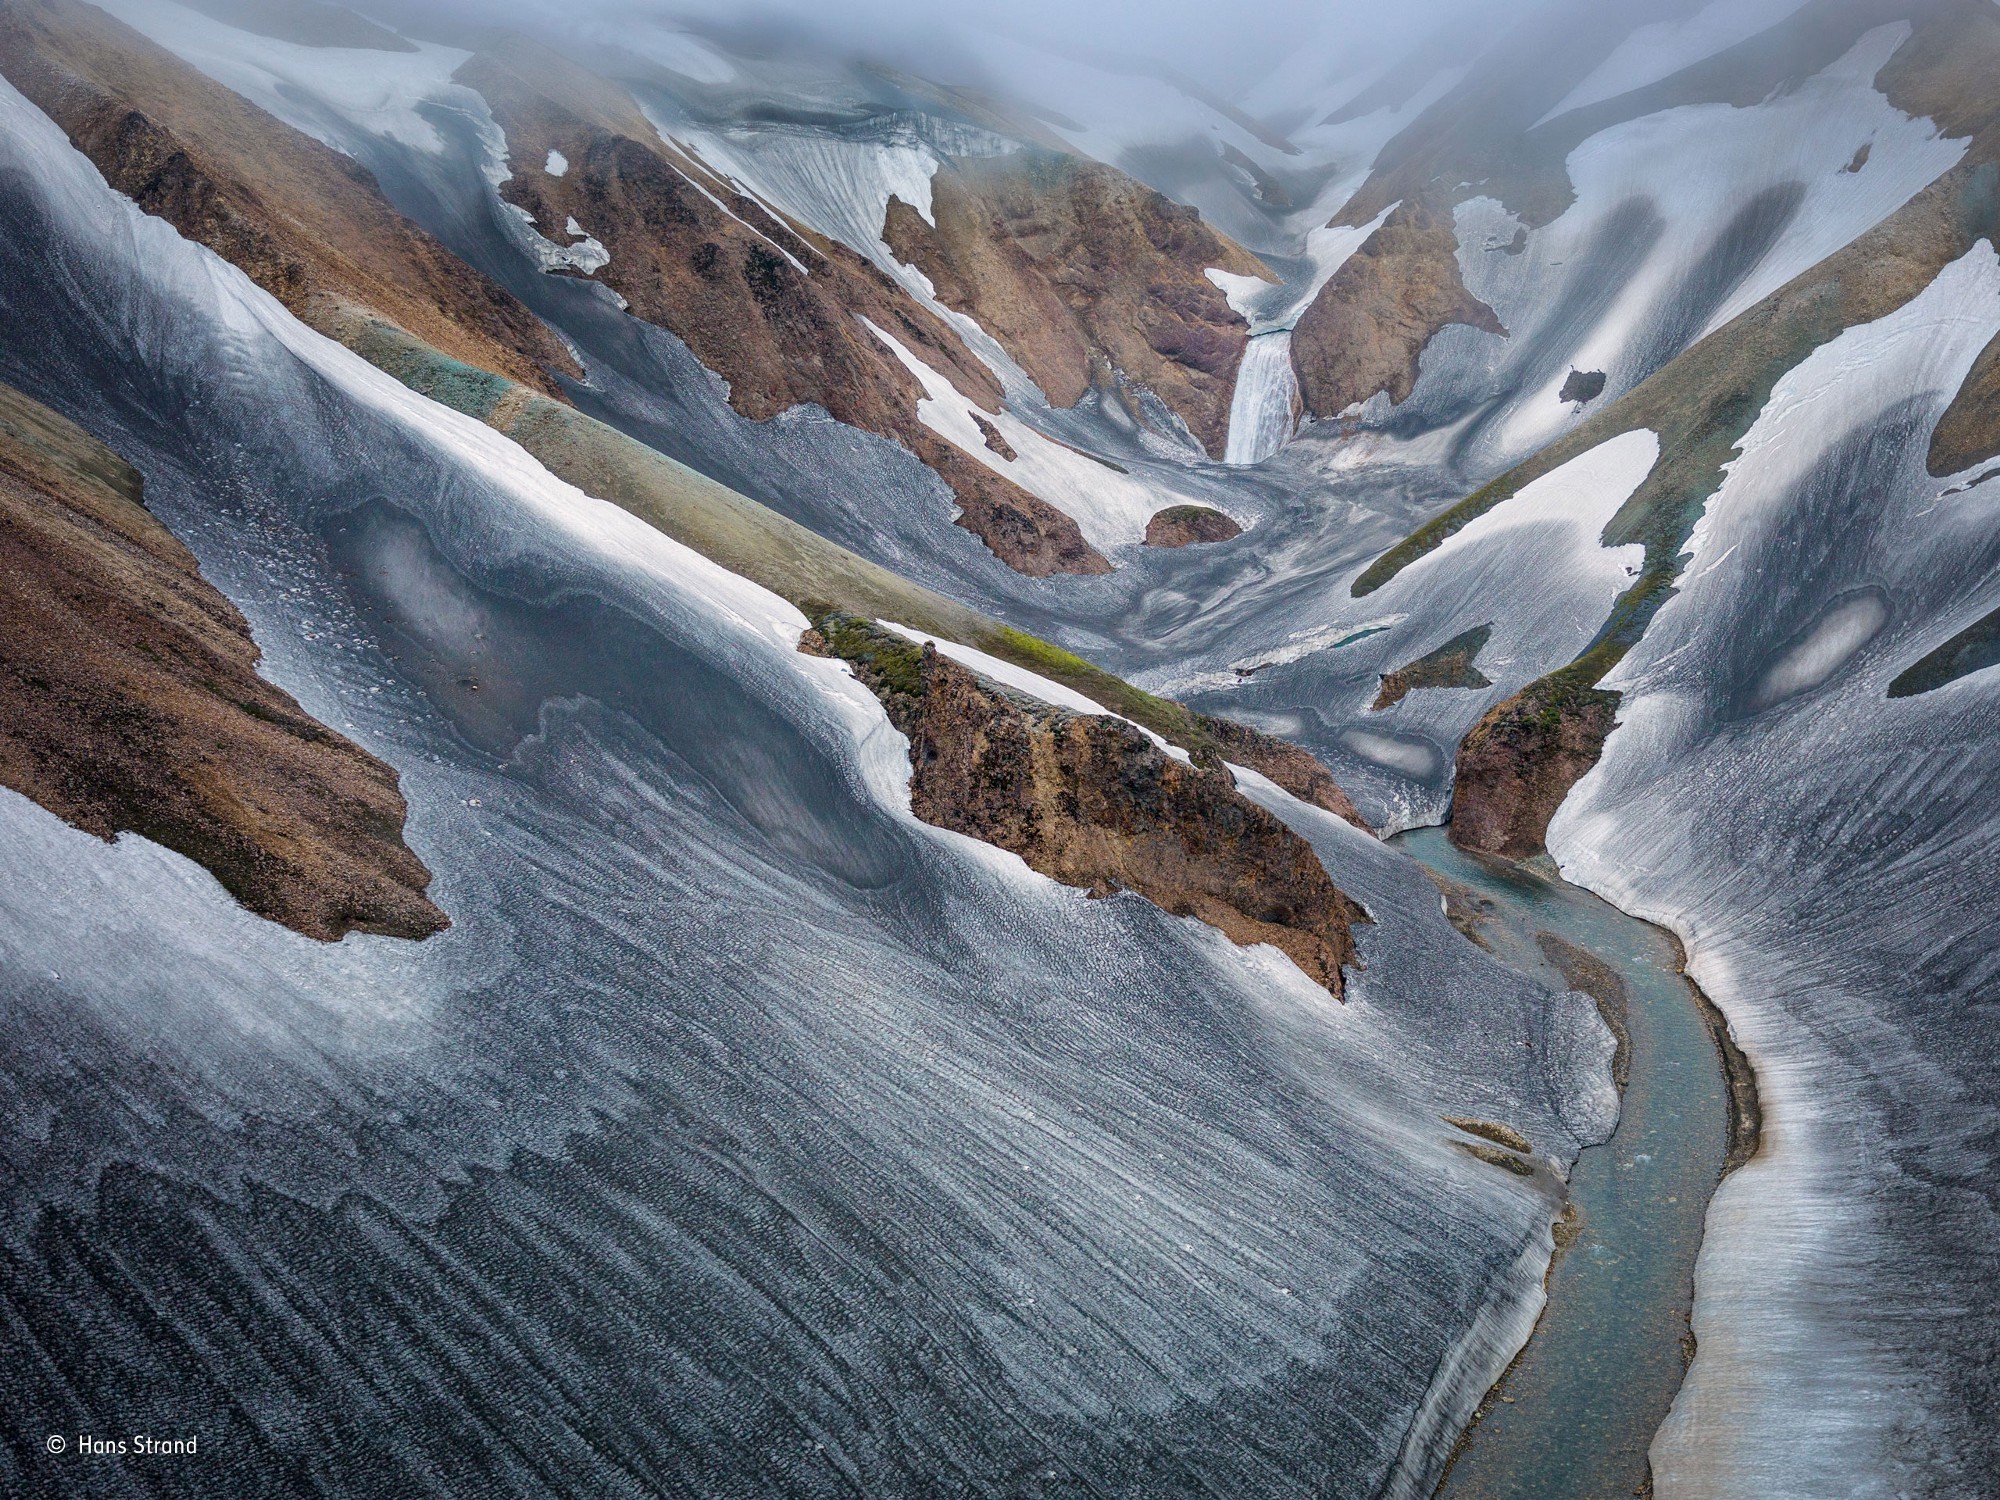 Landscape Winter Snow Ice Mountains Valley Winner Photography Contests Rock Mist Frozen River 2000x1500